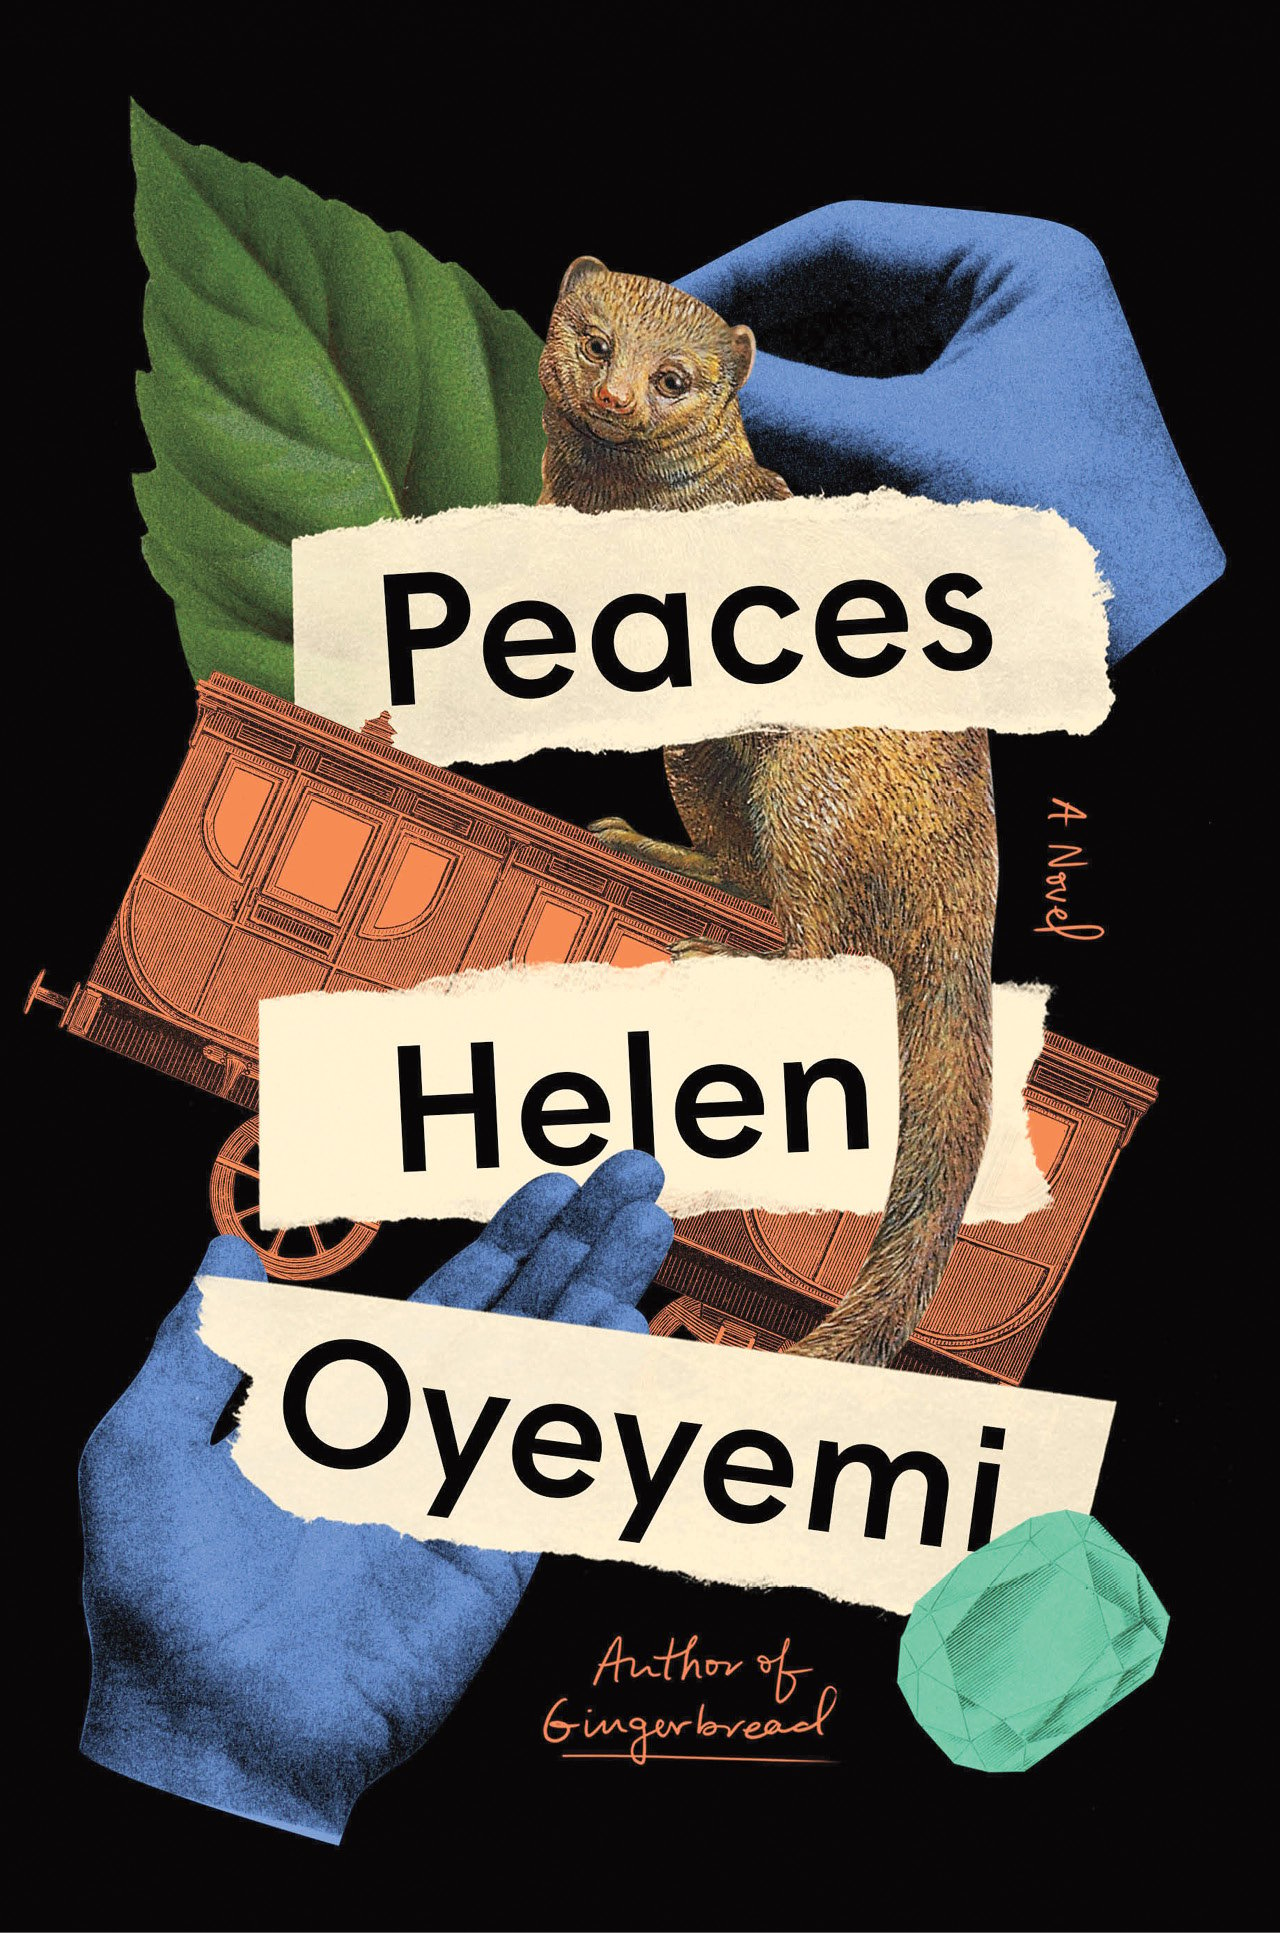 The book cover of "Peaces" by Helen Oyeyemi